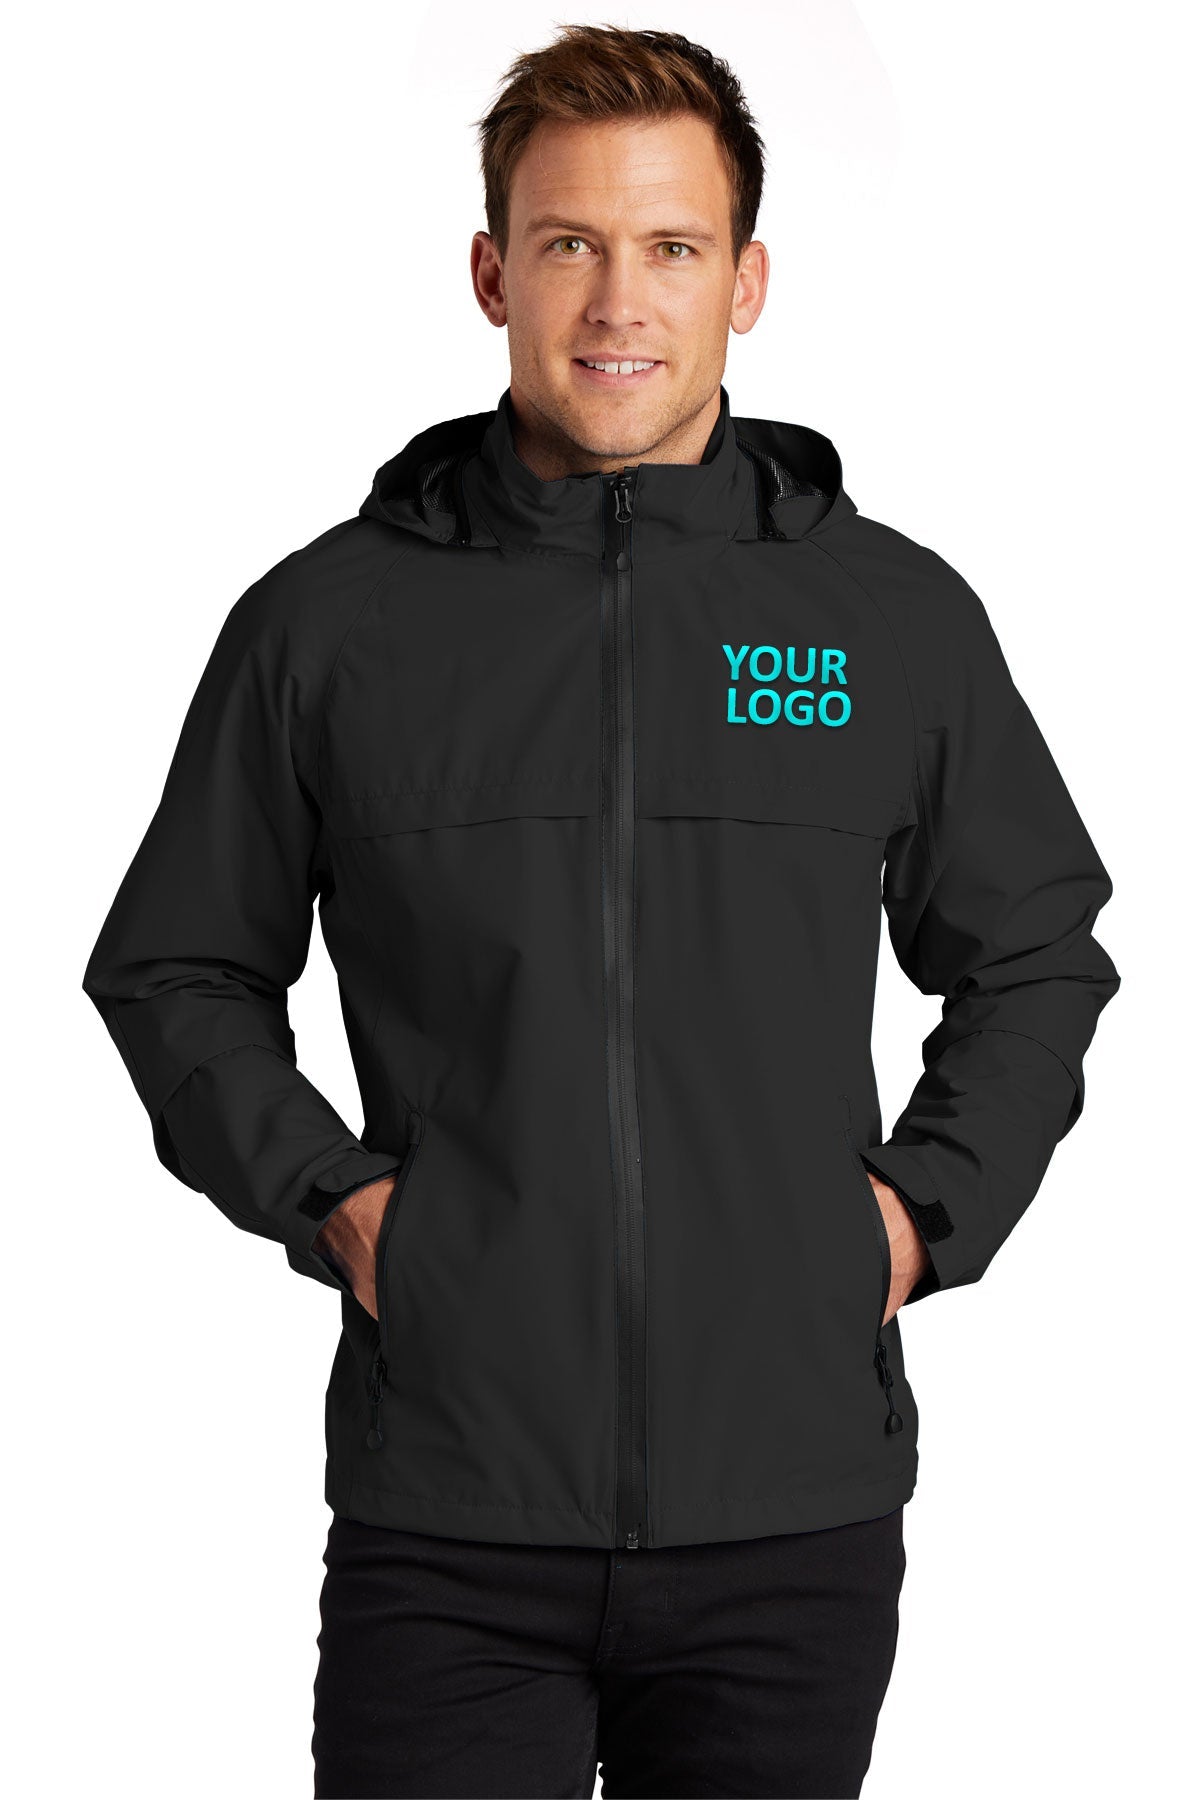 Port Authority Black TLJ333 embroidered team jackets